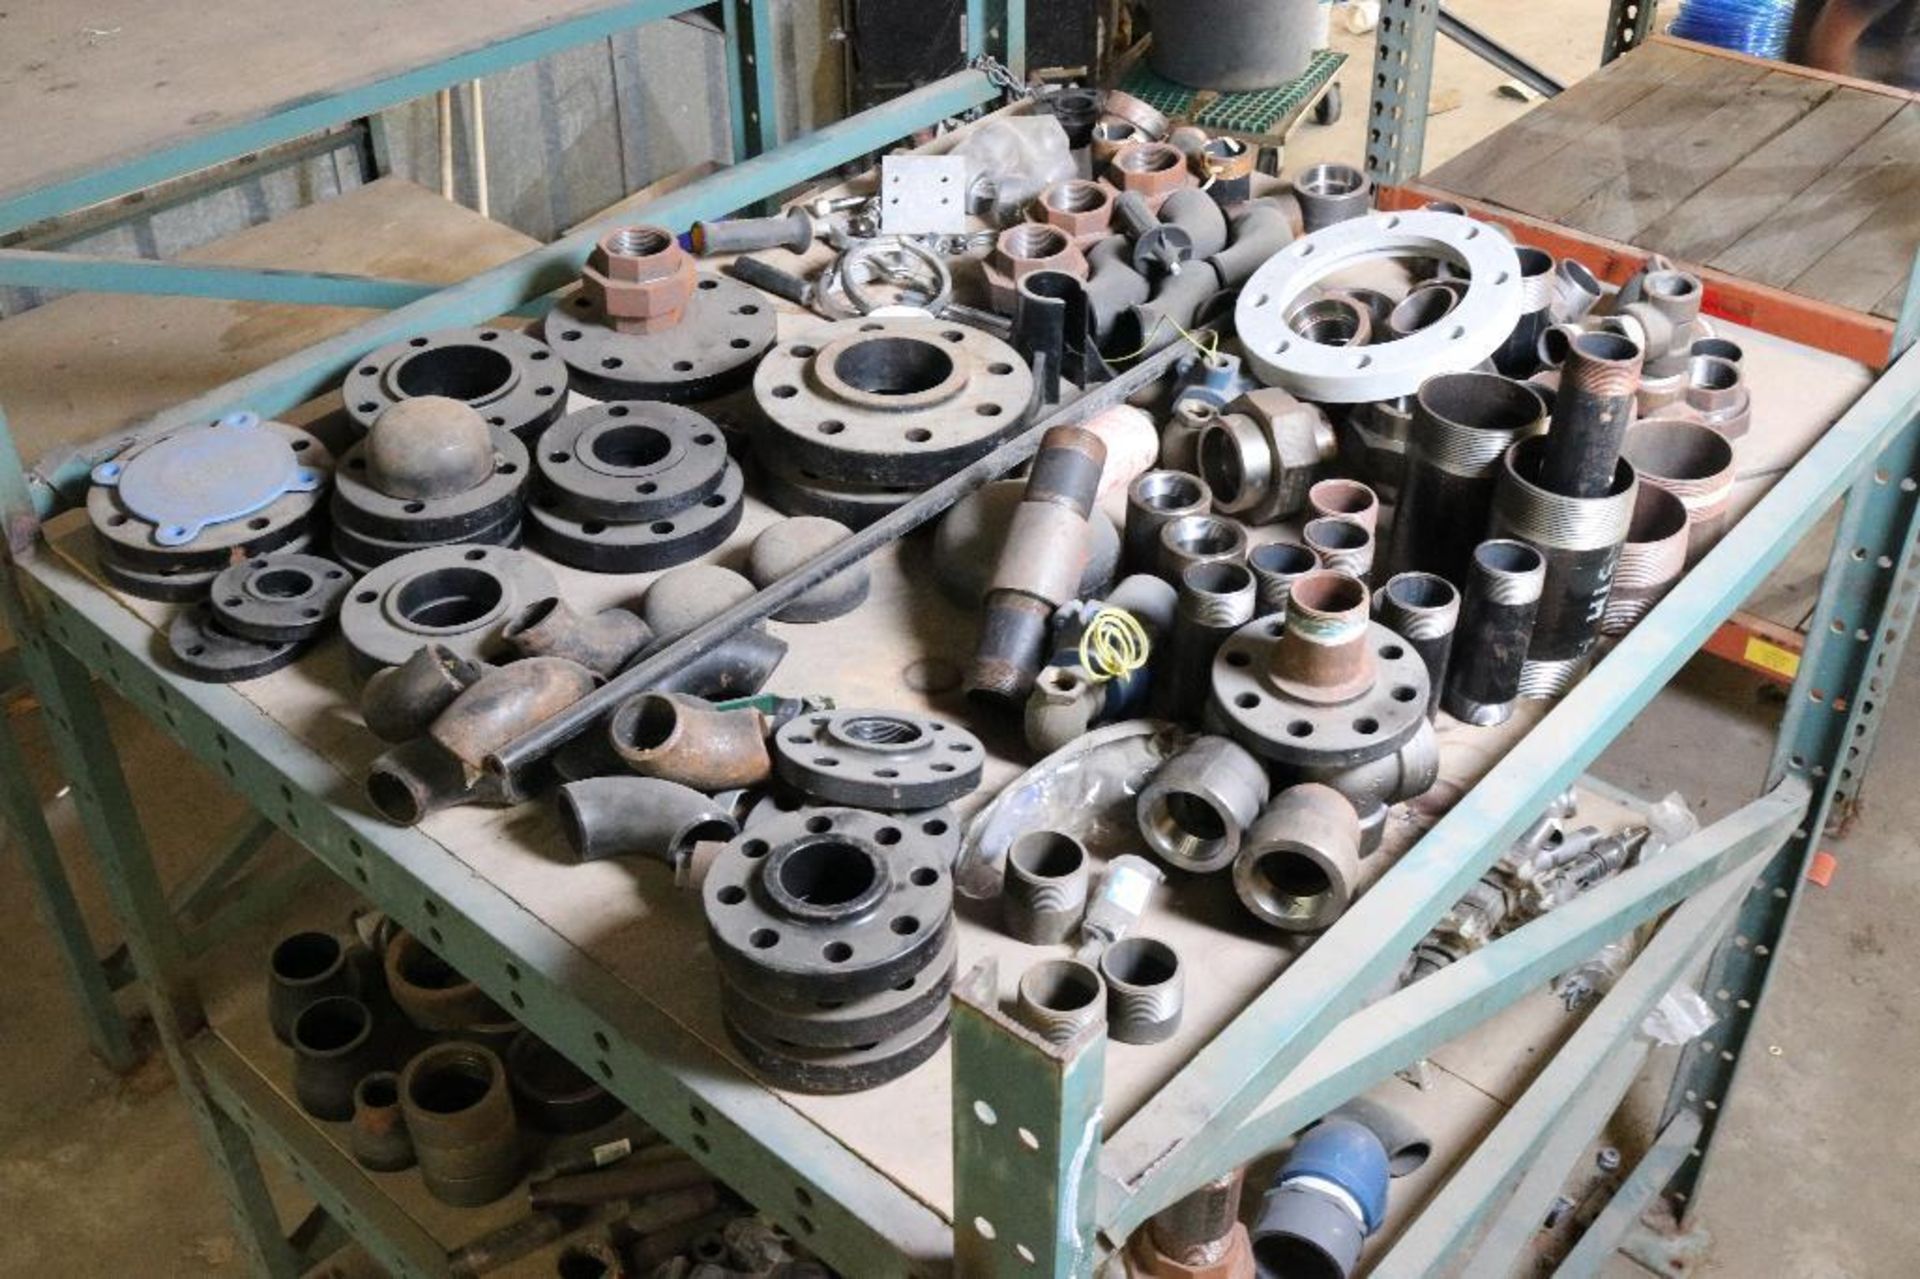 Contents of Shelves - Includes Pipe Fittings, Flanges, and Other Misc. Pipe Components